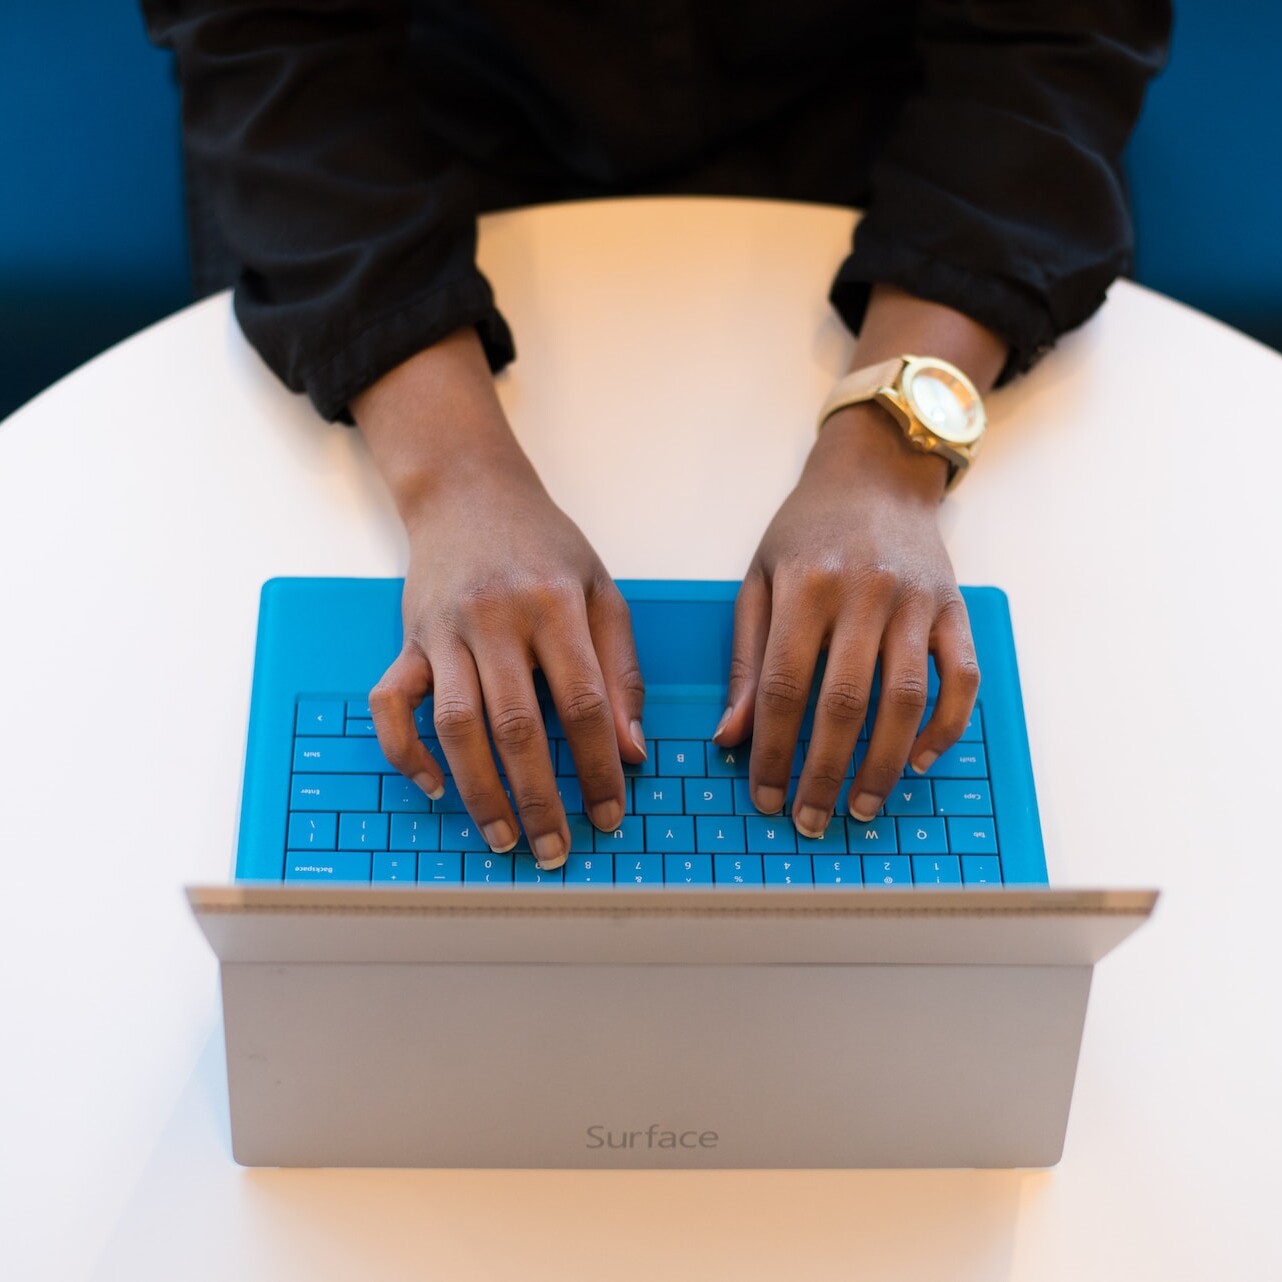 A person typing on laptop with a blue keyboard.